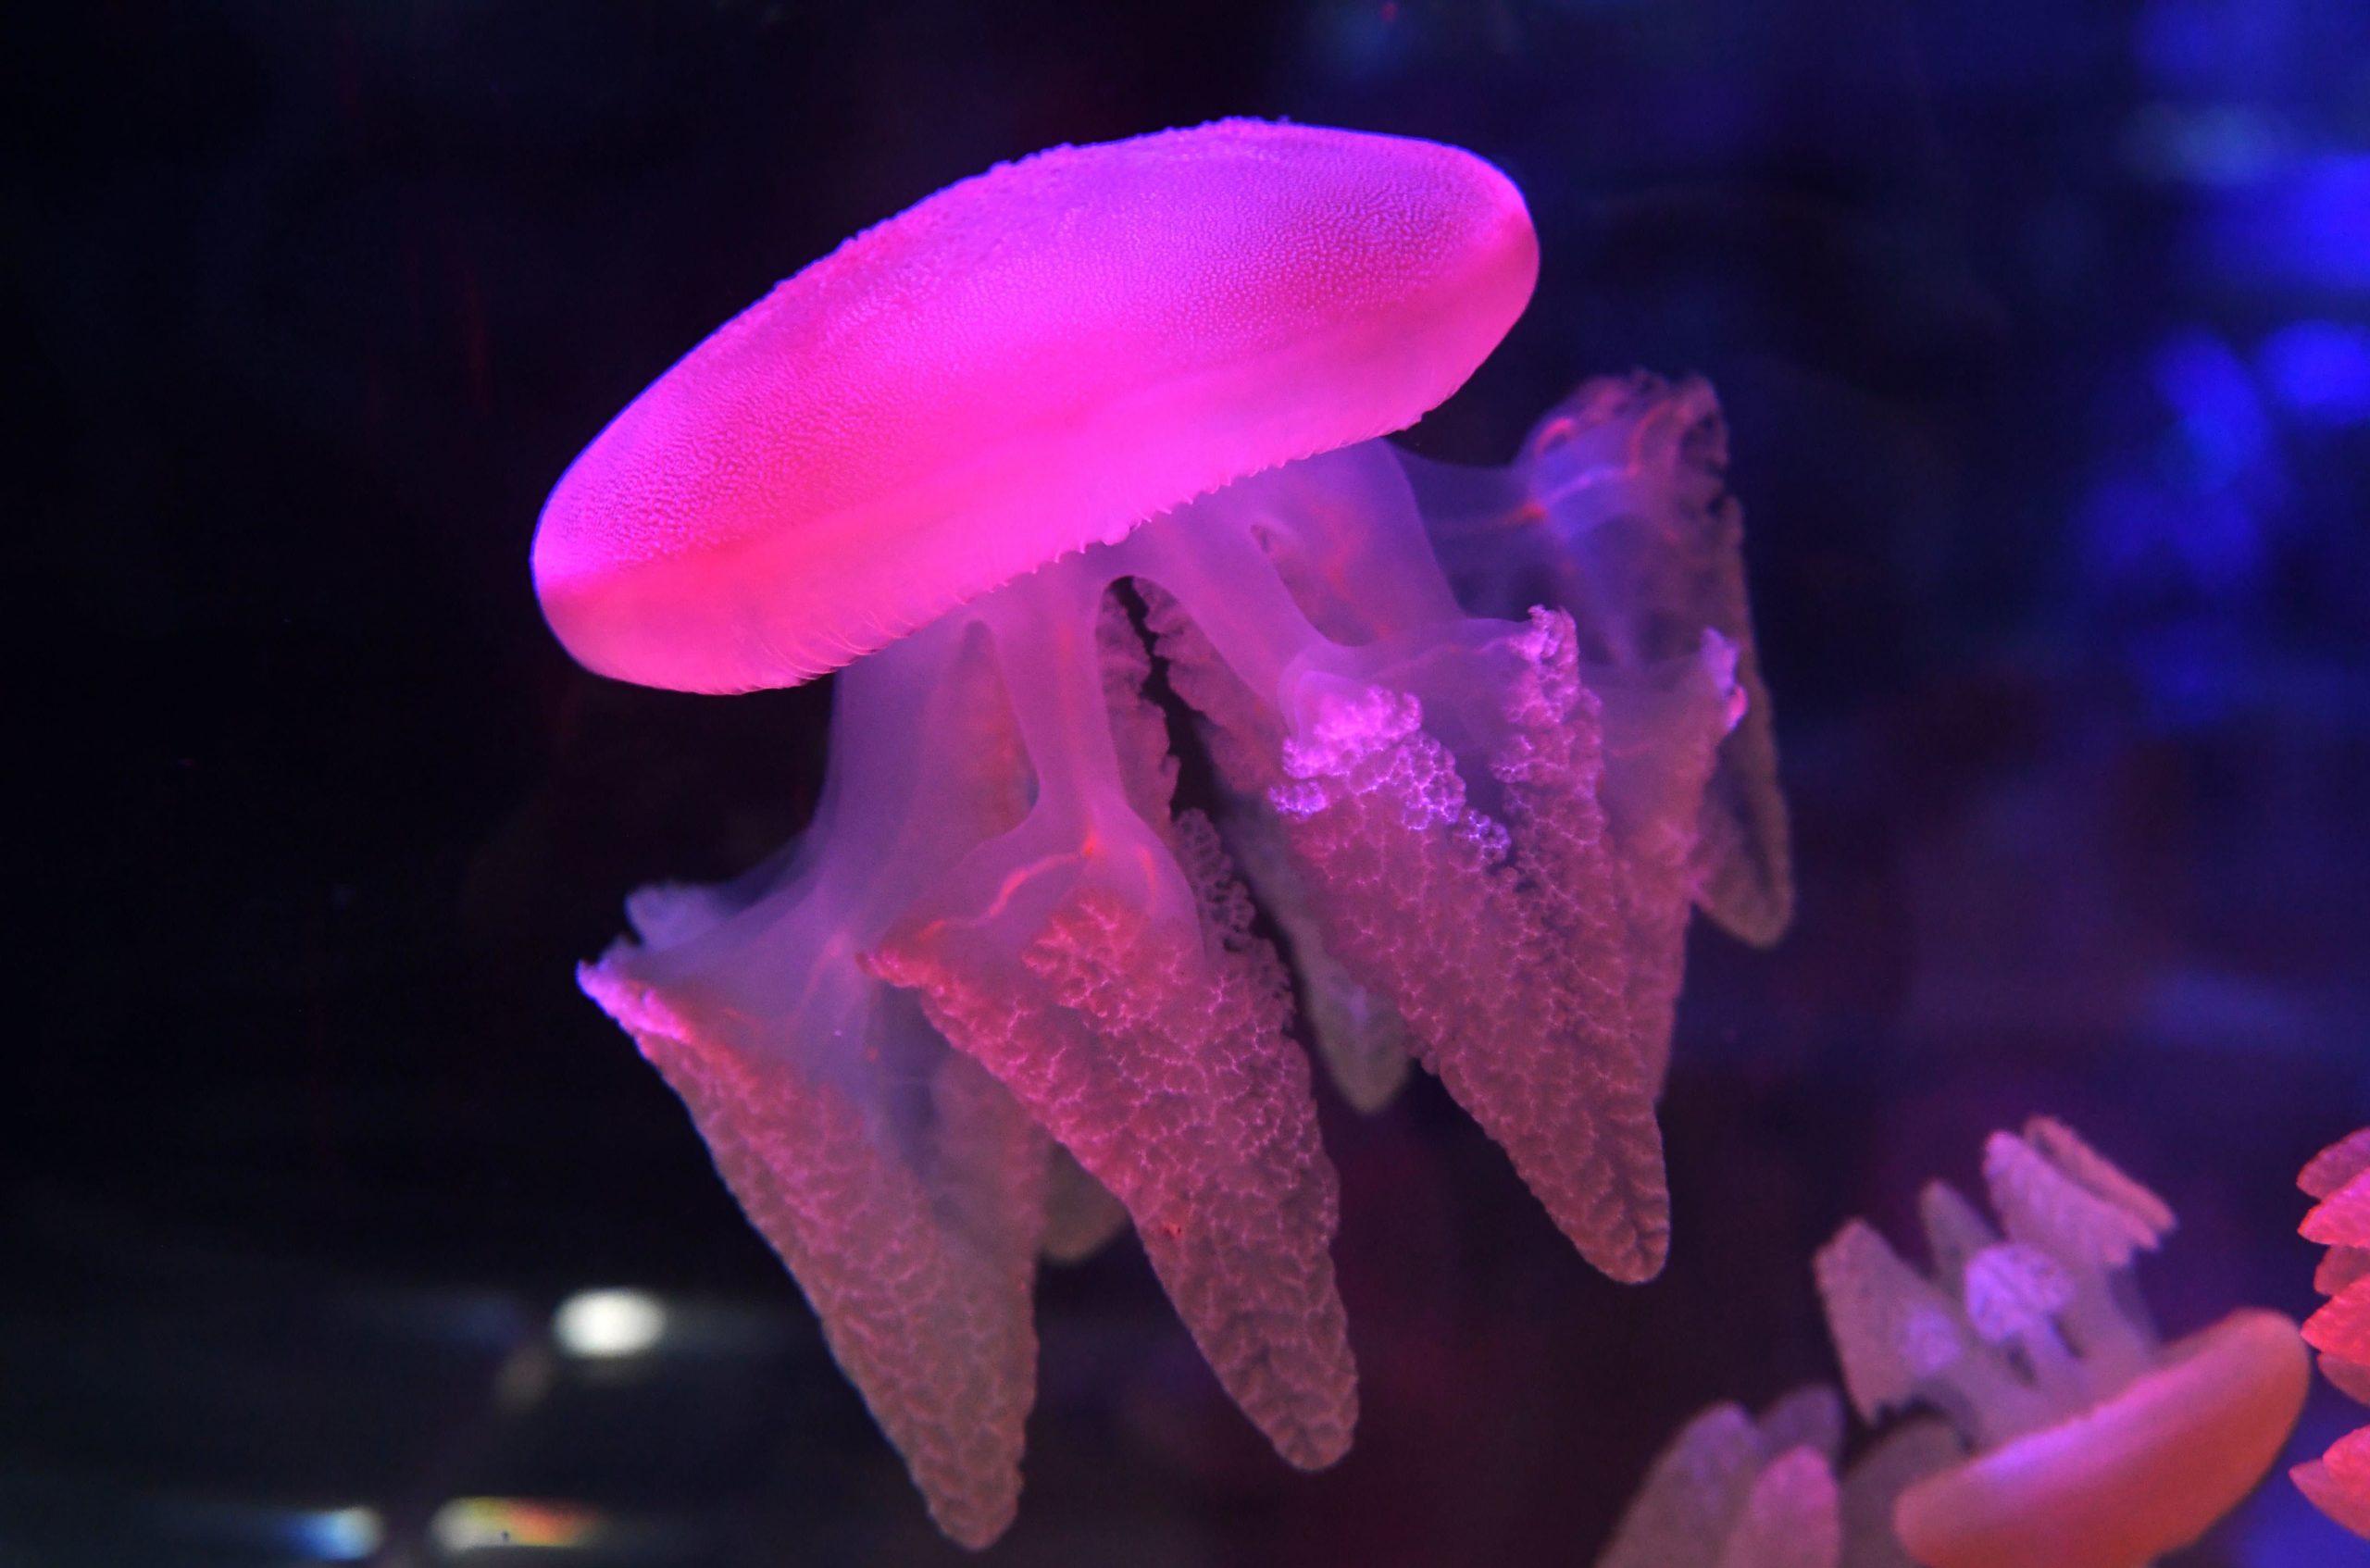 A beautiful blubber jellyfish swims in its display tank at Sea Life Melbourne Aqaurium in Melbourne on May 26, 2020. (Photo: William West, Getty Images)